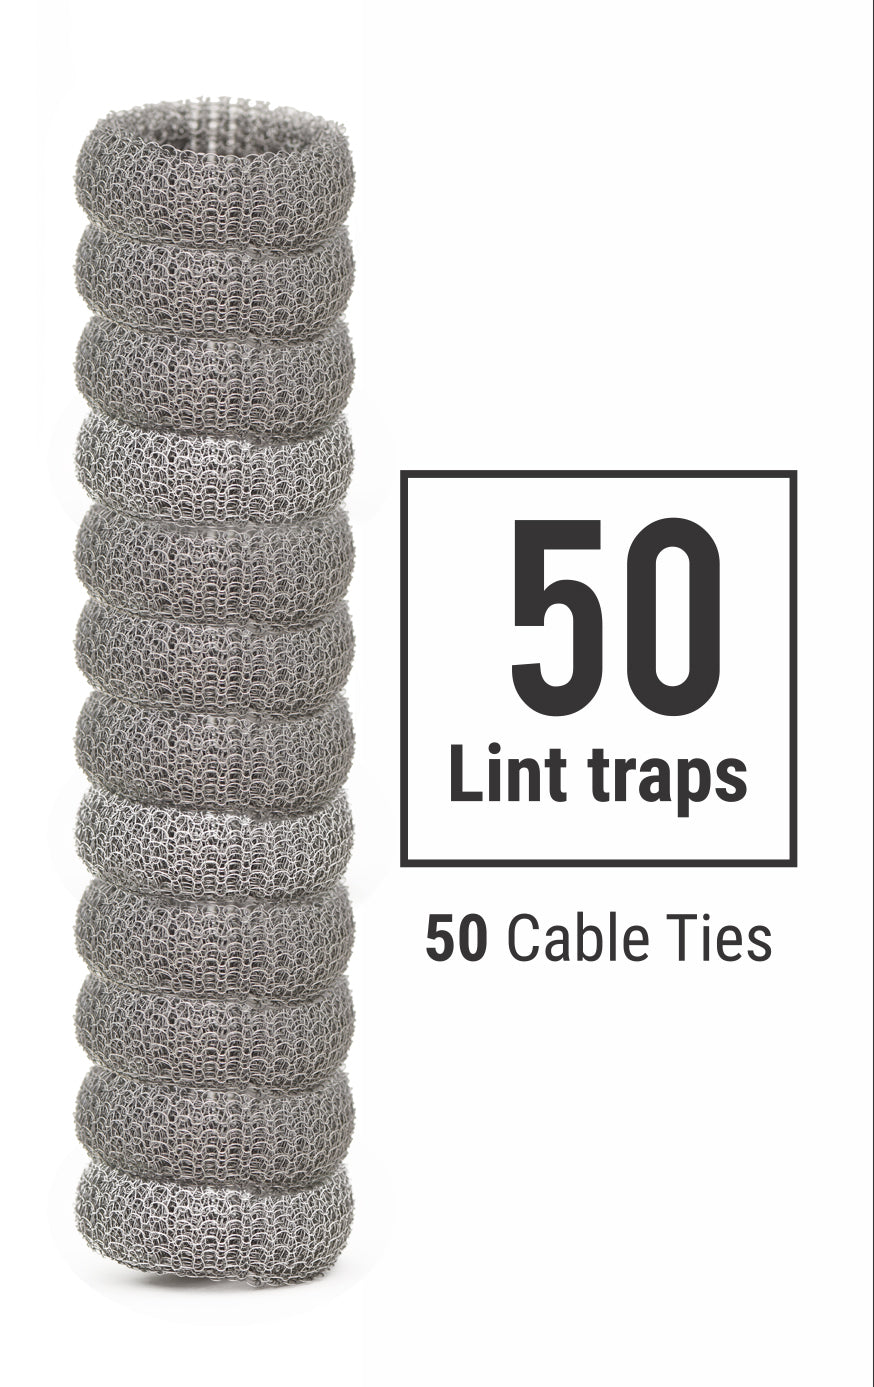 Great Choice Products GCP-5471377 50Pcs Washing Machine Lint Traps Snare  Filter Screen Stainless Steel Mesh Ties